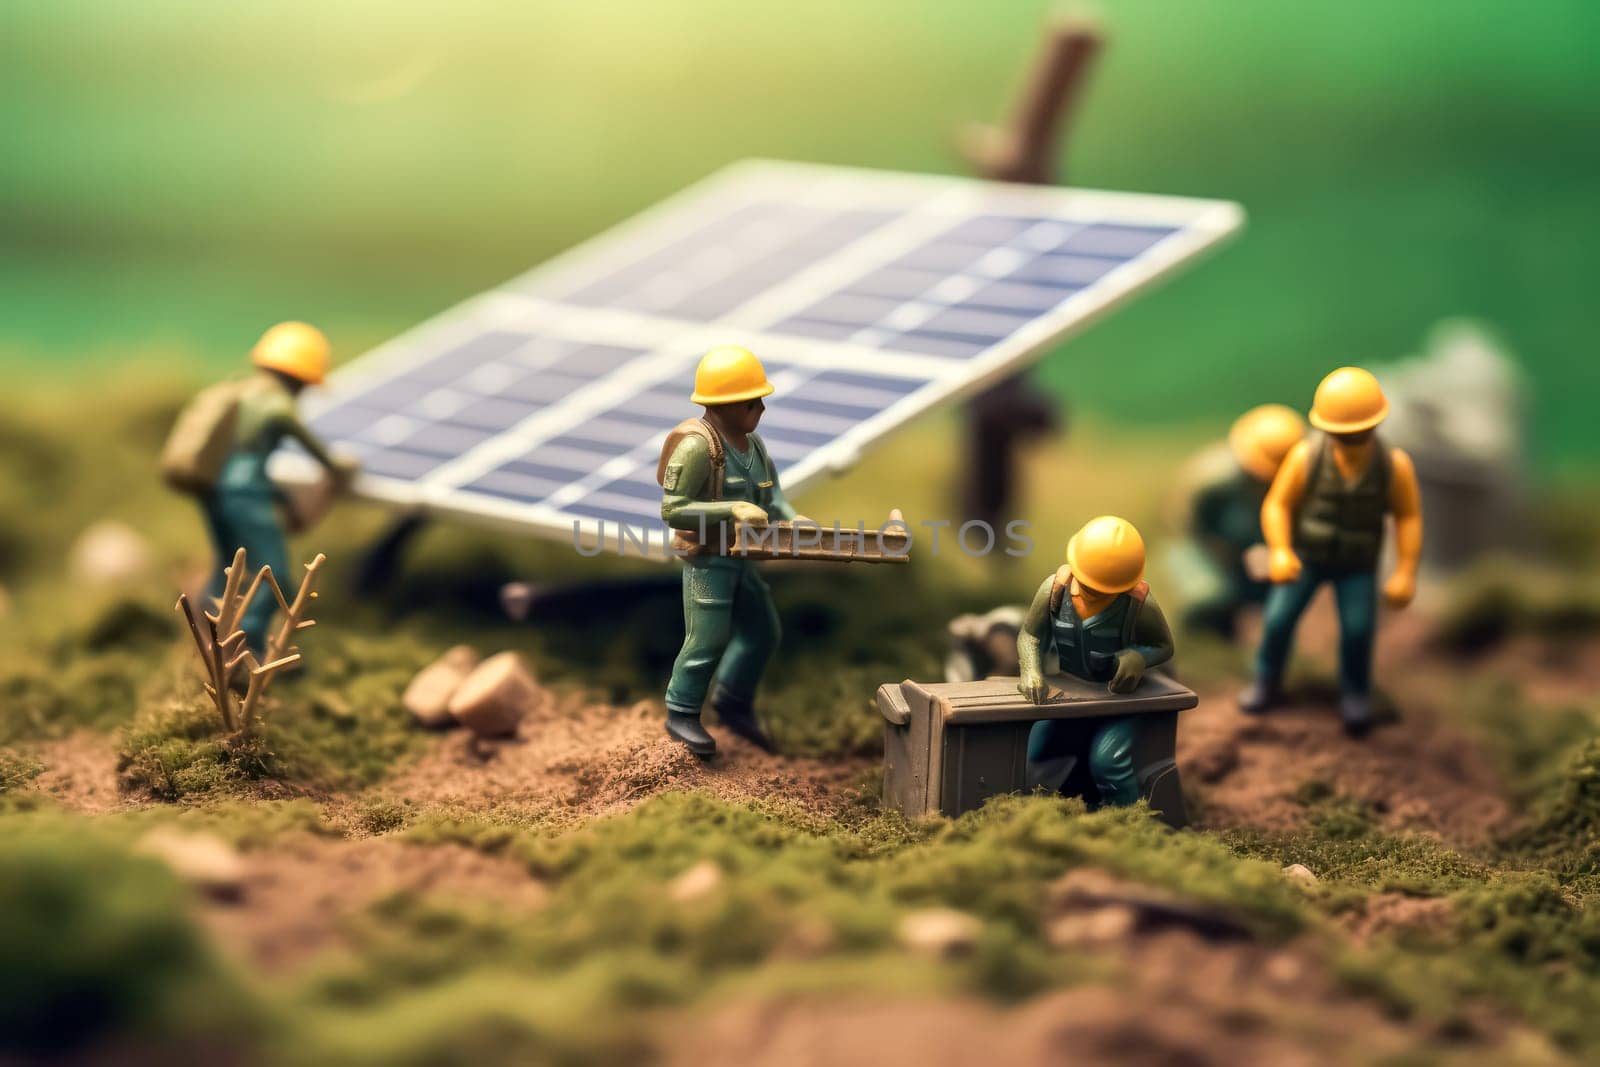 Miniature workers near solar panels standard illustration capturing the concept of renewable energy and sustainable practices in a miniature world.